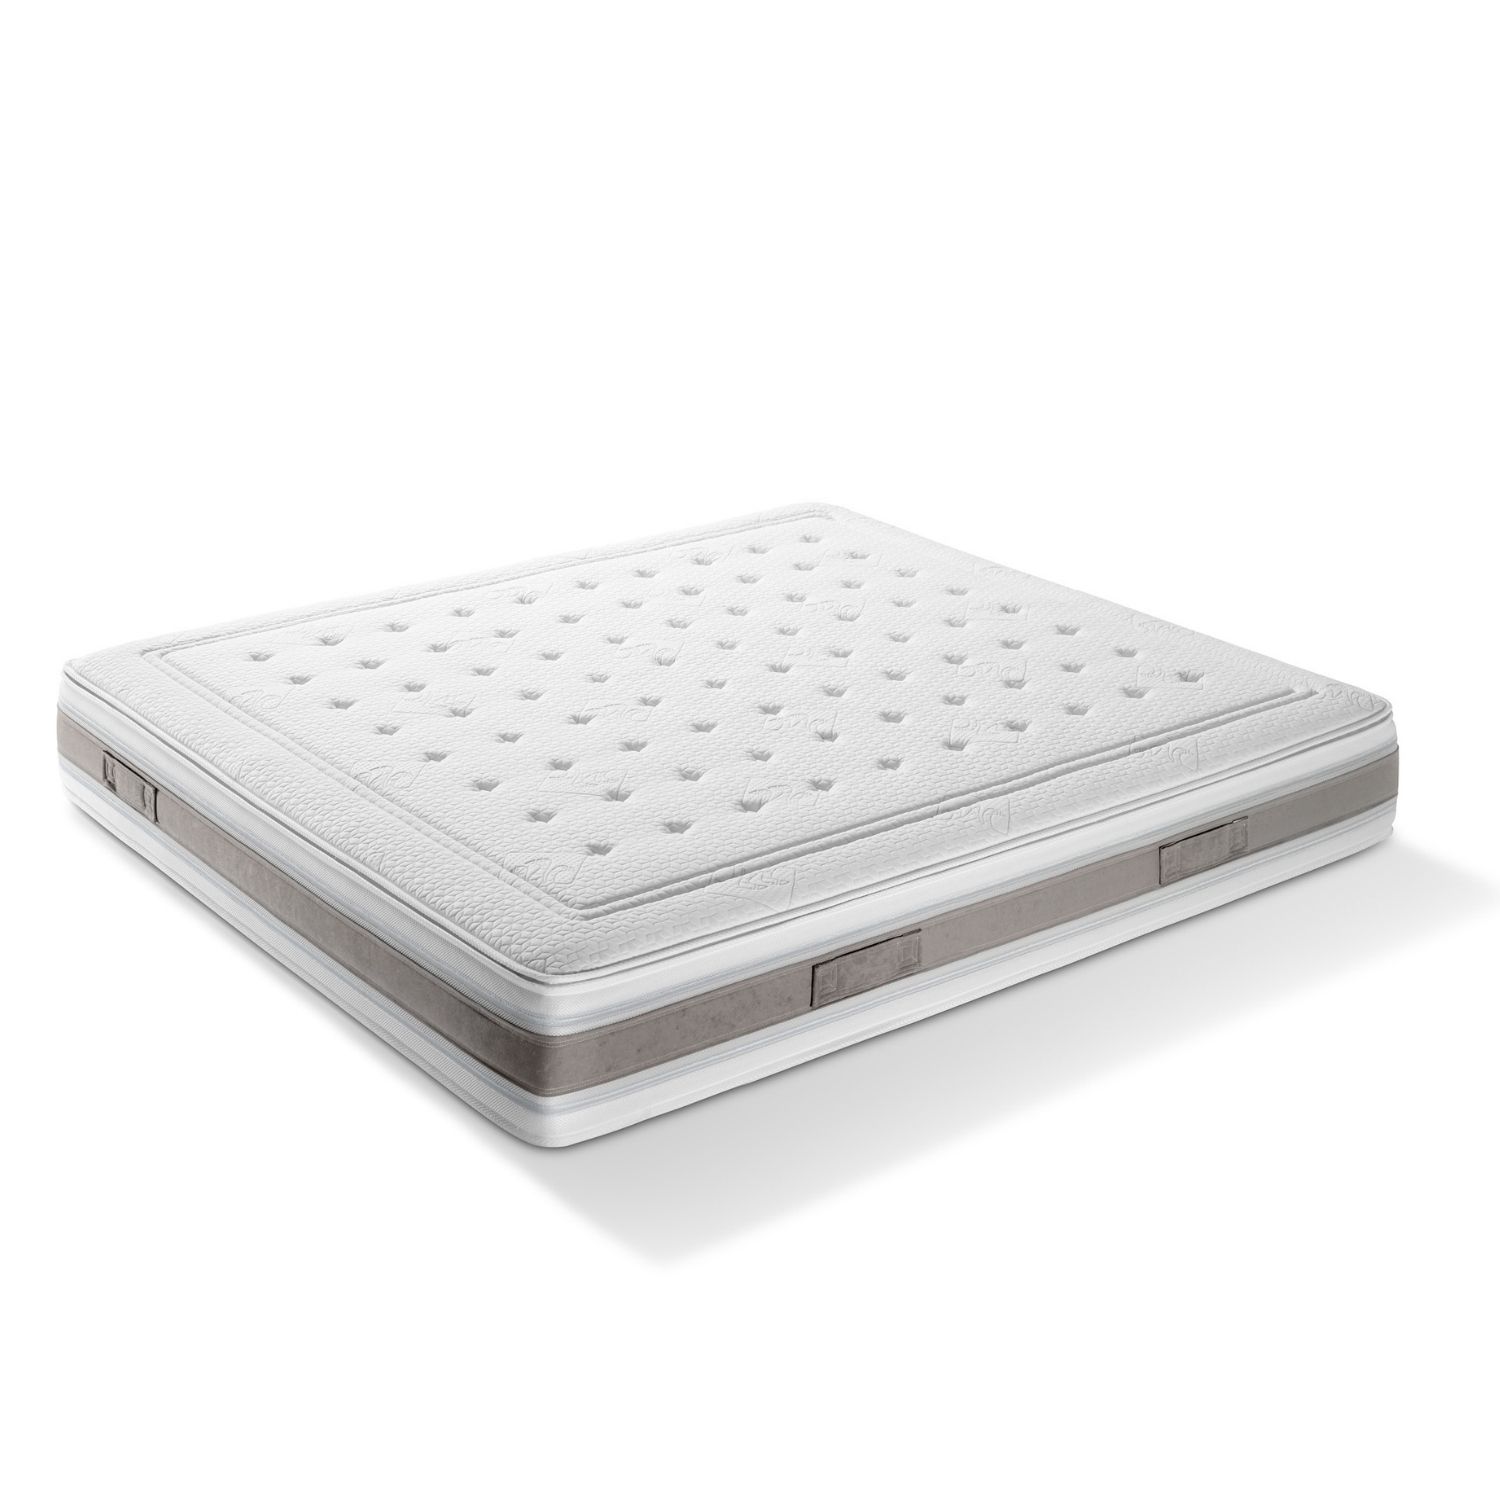 Mattress Deluxe with Pocket Springs and Double Memory